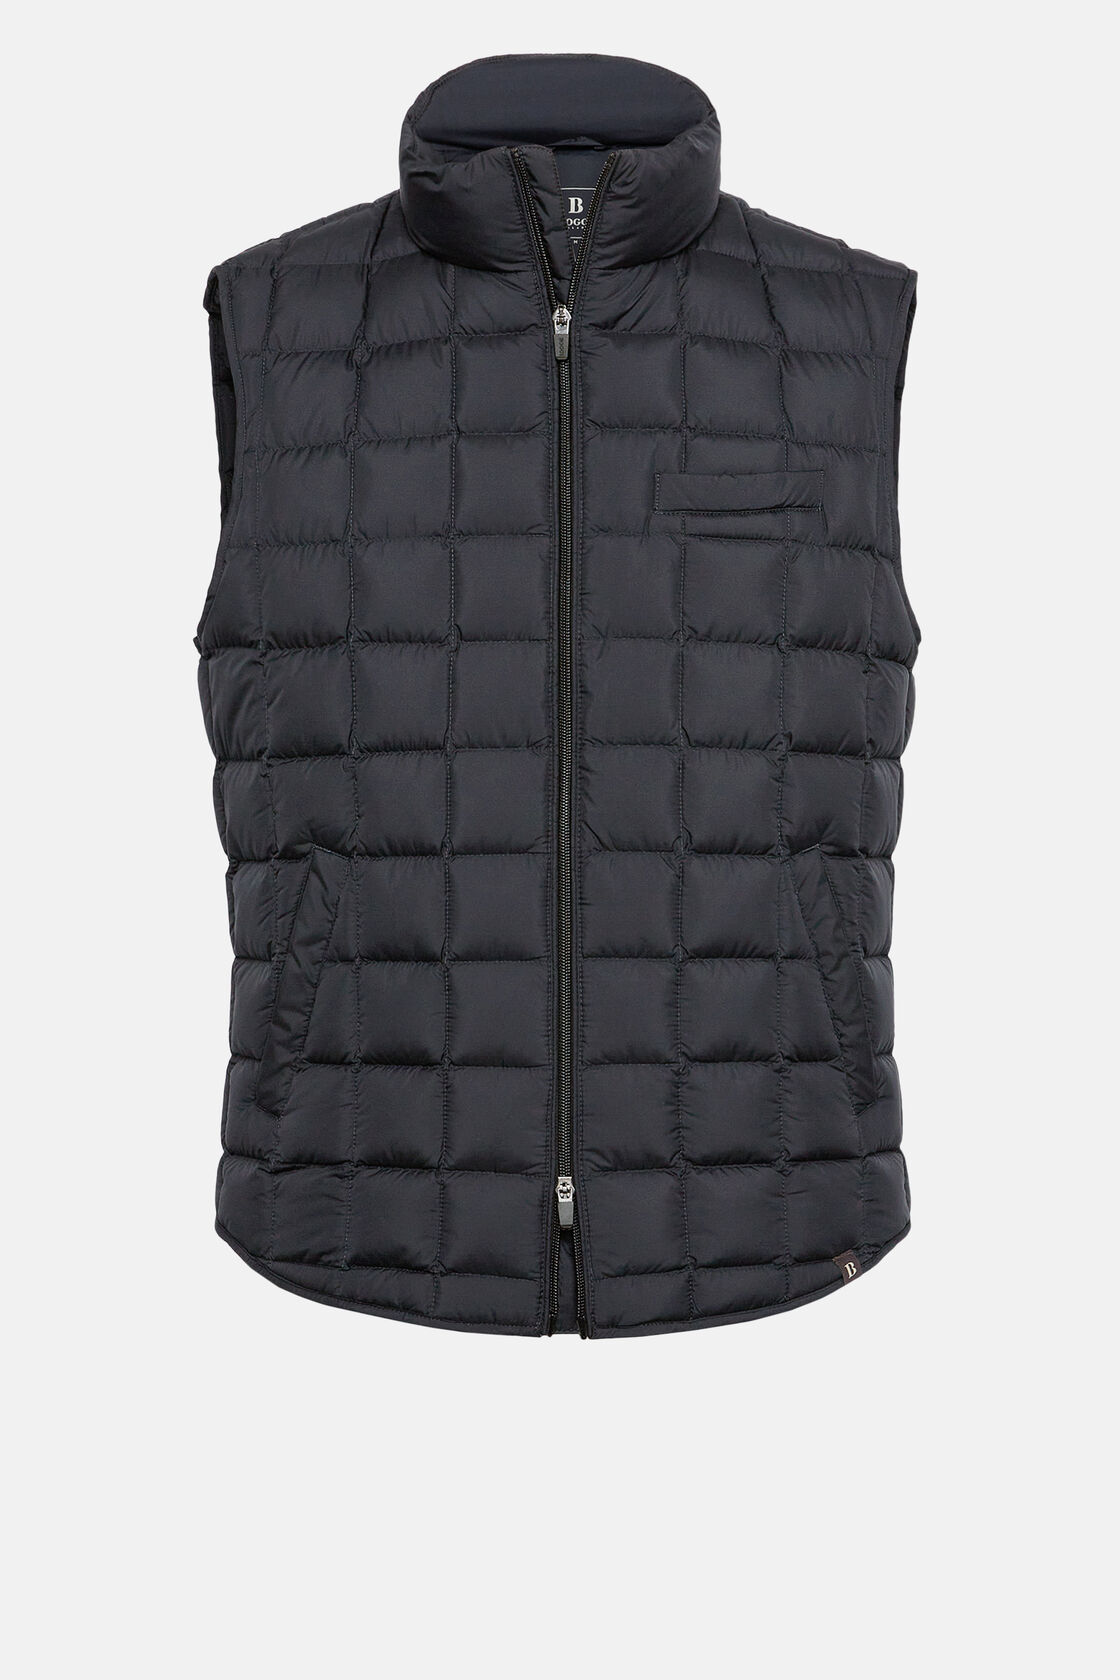 Gilet In Technical Fabric With Goose Down, Navy blue, hi-res